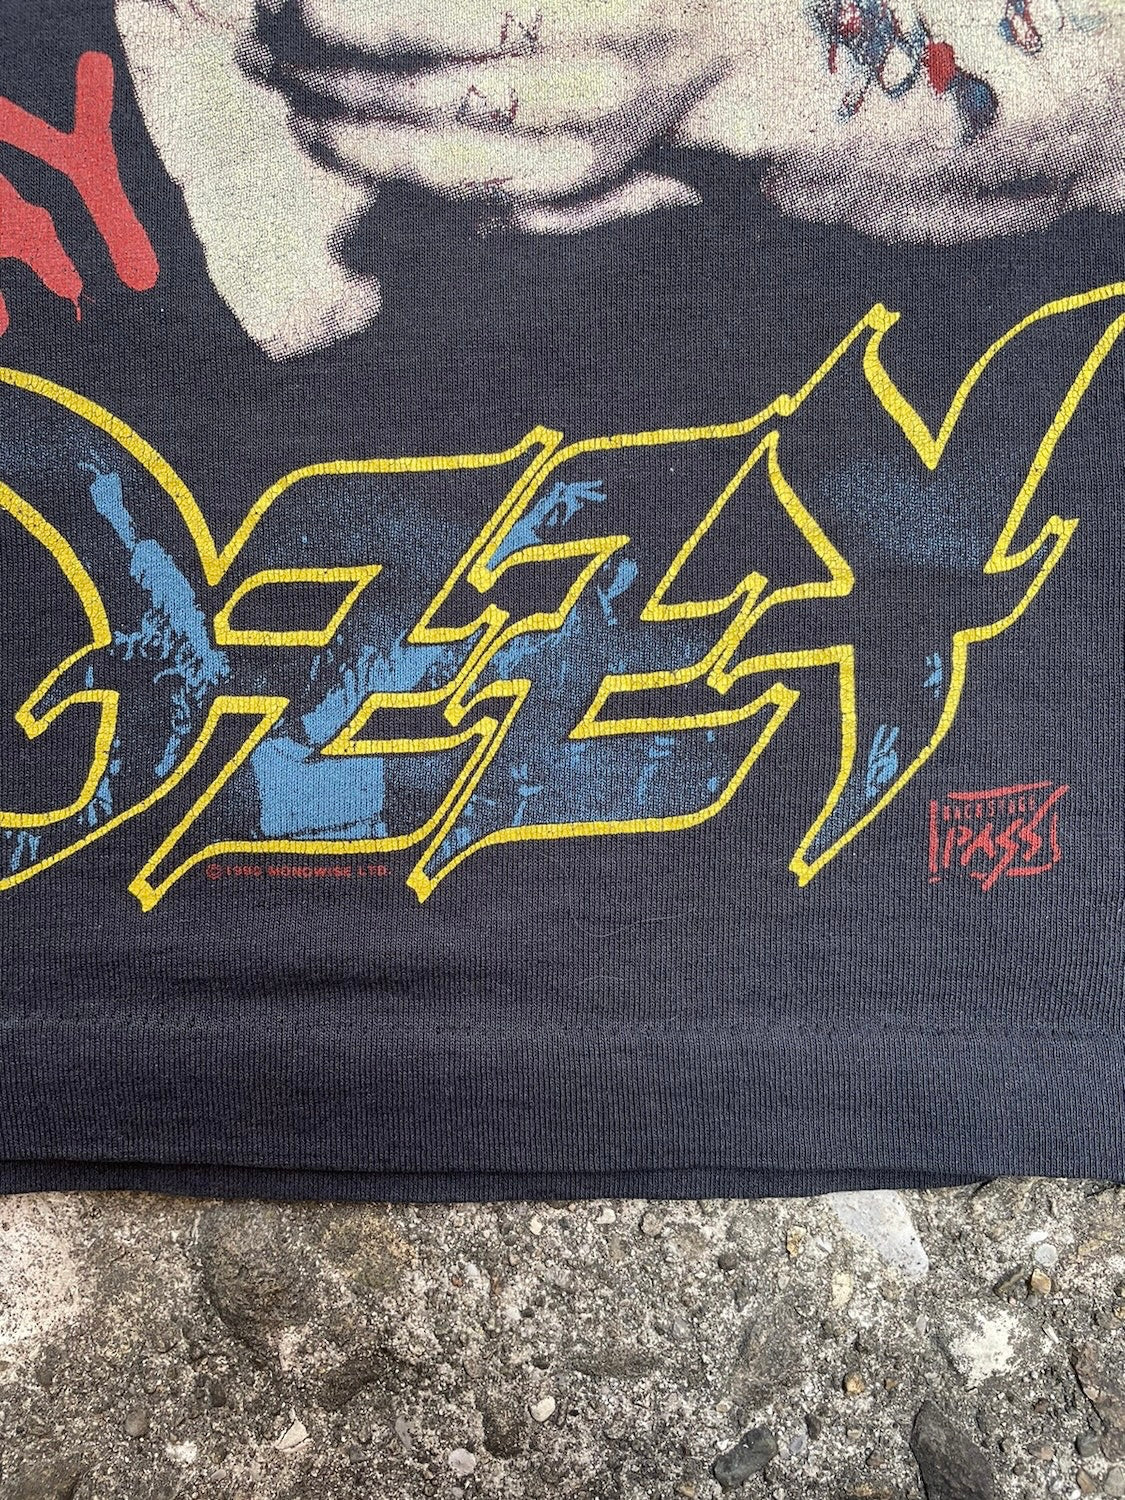 1990 Ozzy Osbourne 'Just Say Ozzy' Band T-Shirt - S